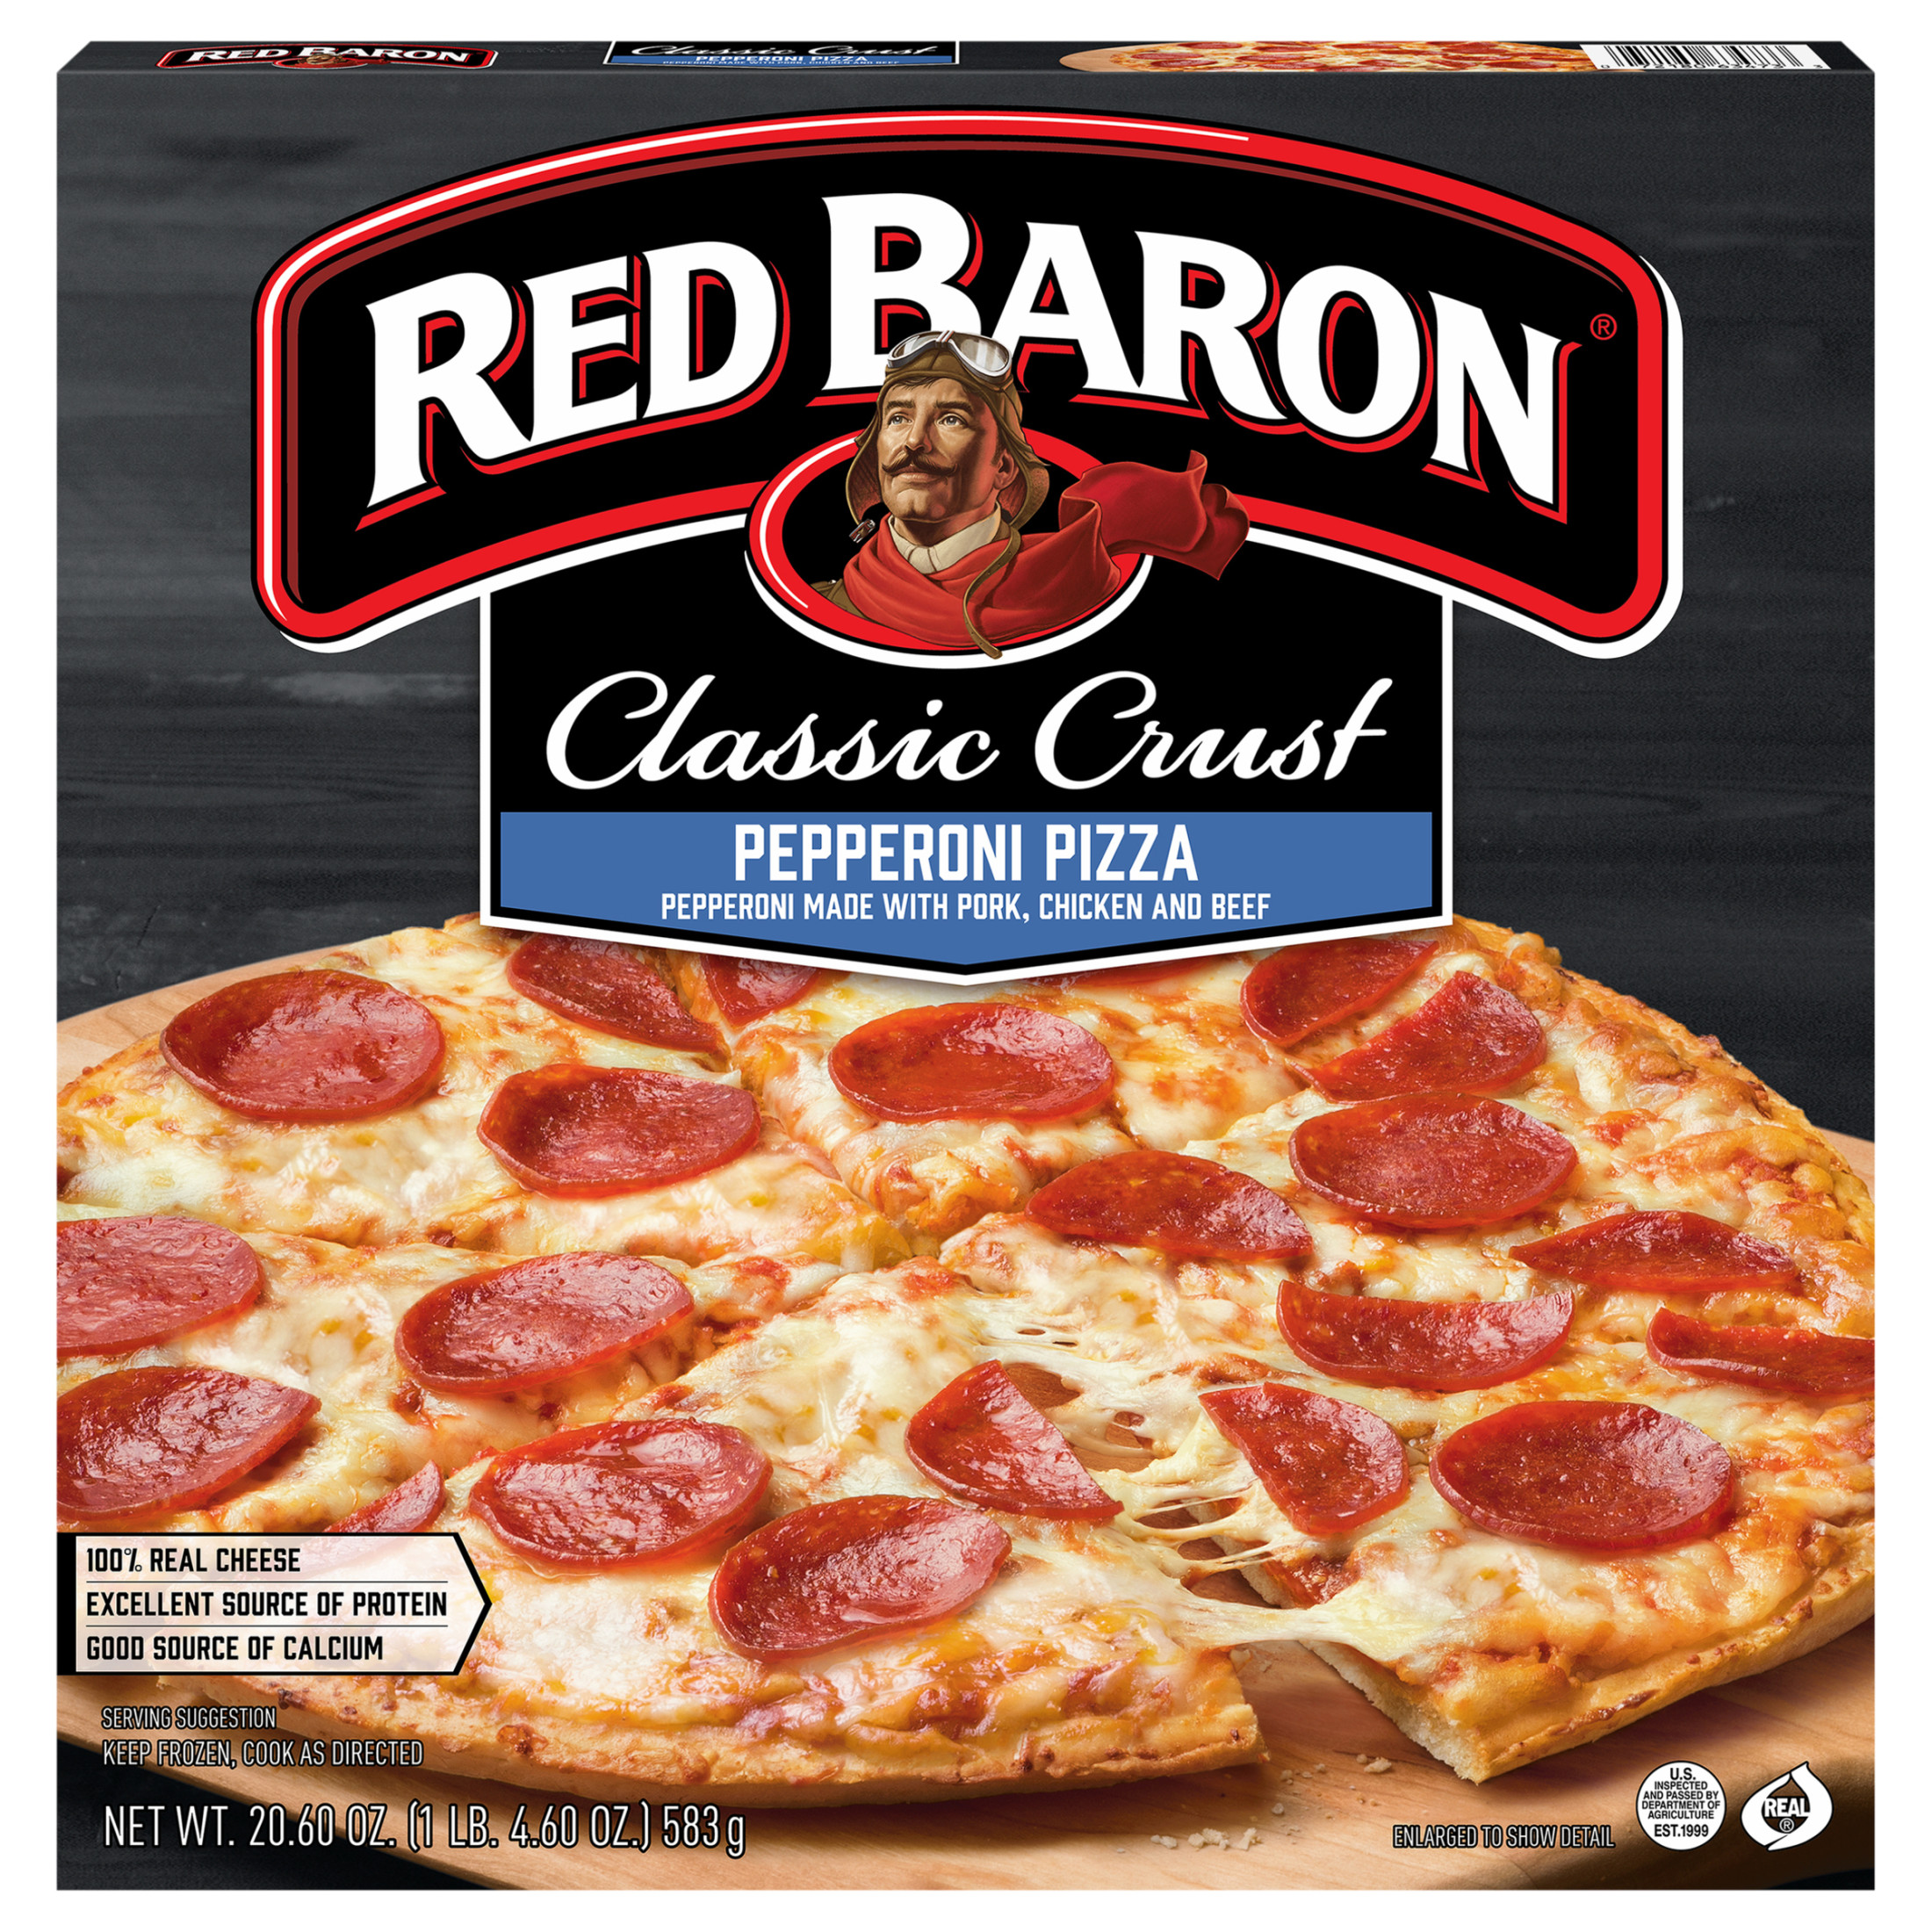 Red Baron Frozen Pizza Classic Crust Pepperoni, 20.61 oz - image 1 of 14